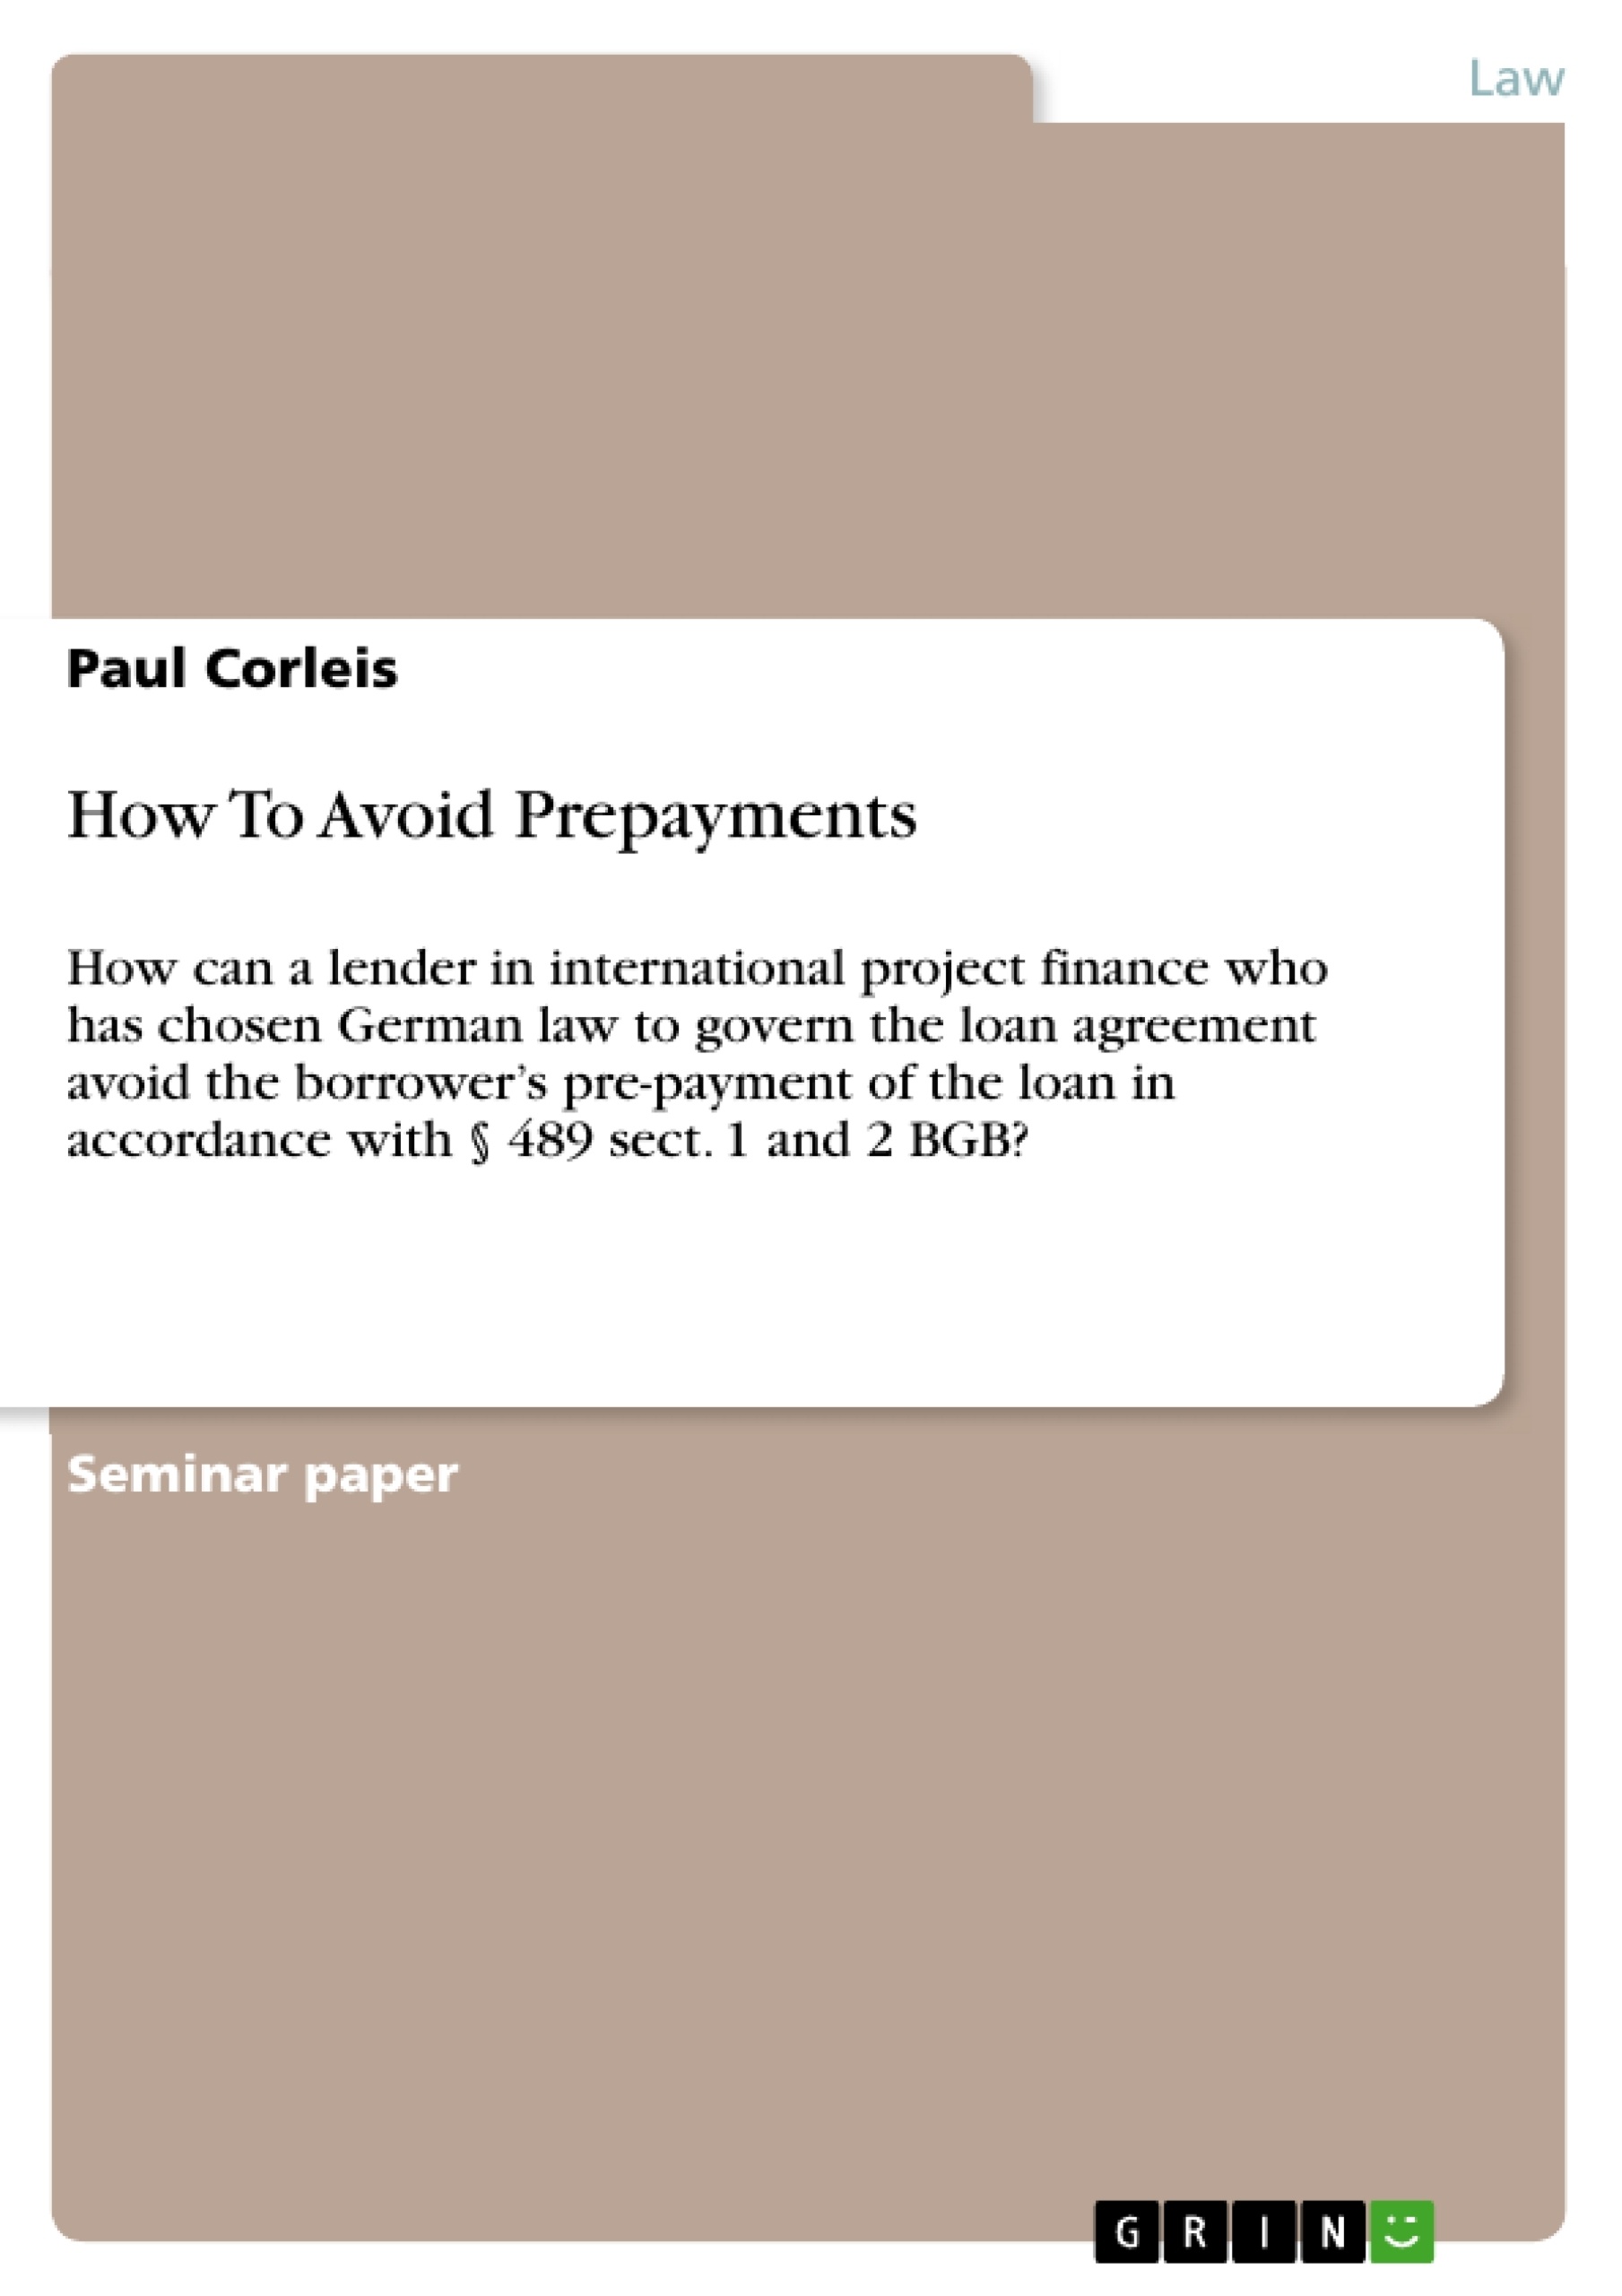 Title: How To Avoid Prepayments